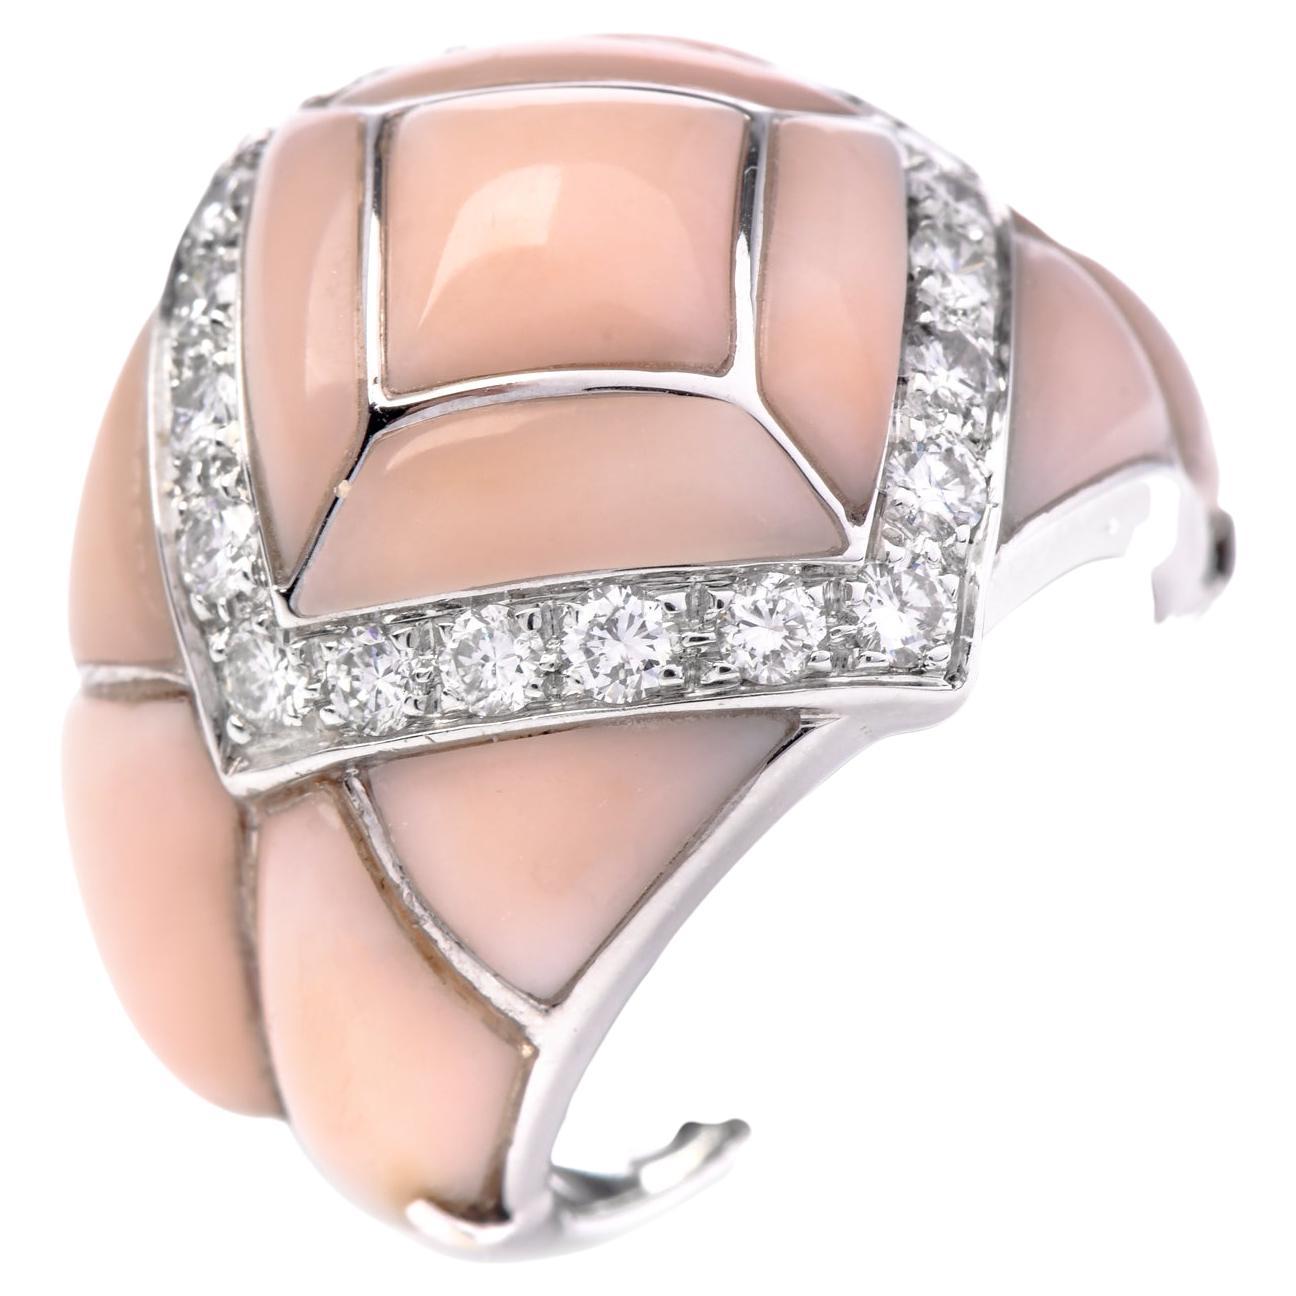 This 1980s jewelry cocktail ring features an elegant blend of coral and diamonds made in 18K White gold. The Estate coral ring showcases a captivating pink coral inlay meticulously adorned with pave-set natural diamonds, all expertly set in solid